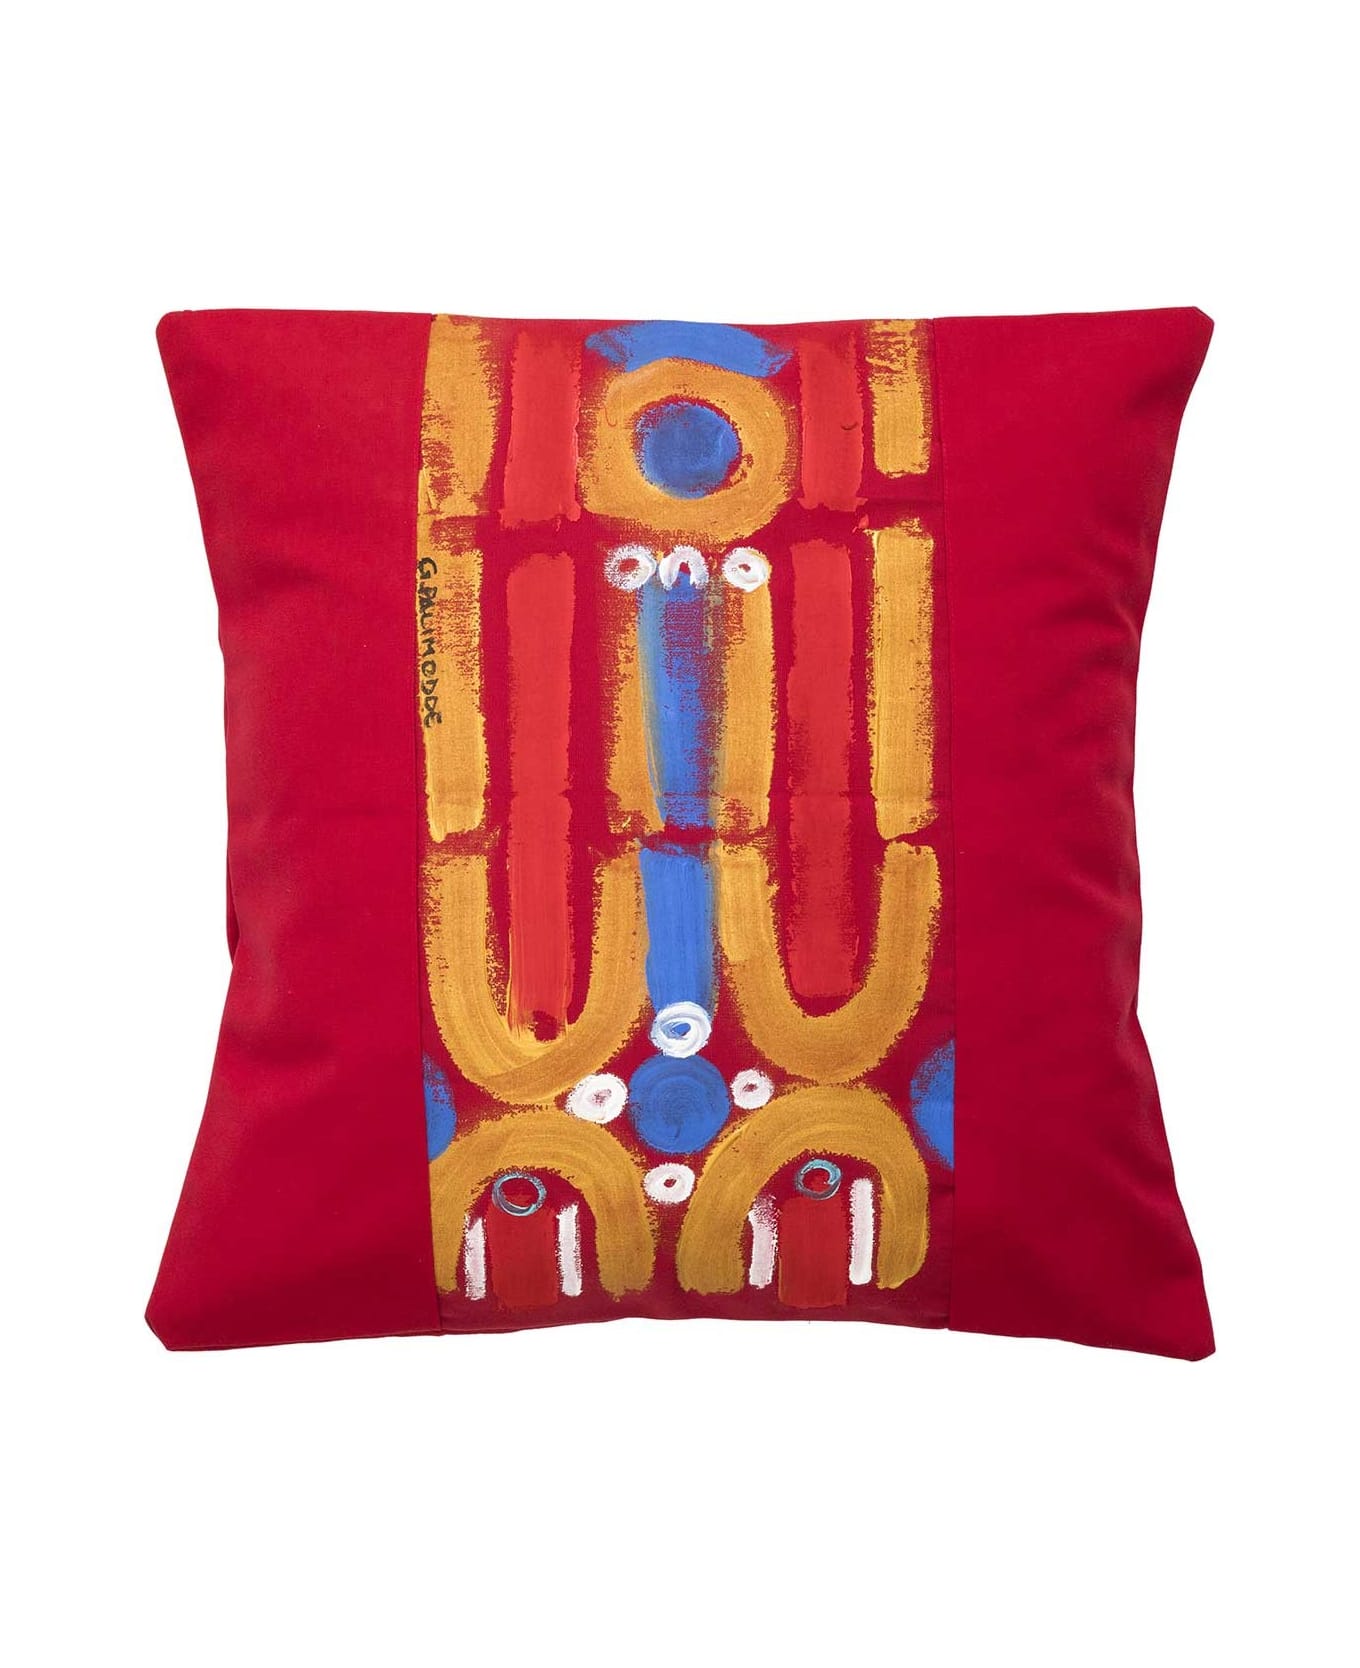 Le Botteghe su Gologone Acrylic Hand Painted Outdoor Cushion 80x80 cm - Red Fantasy クッション